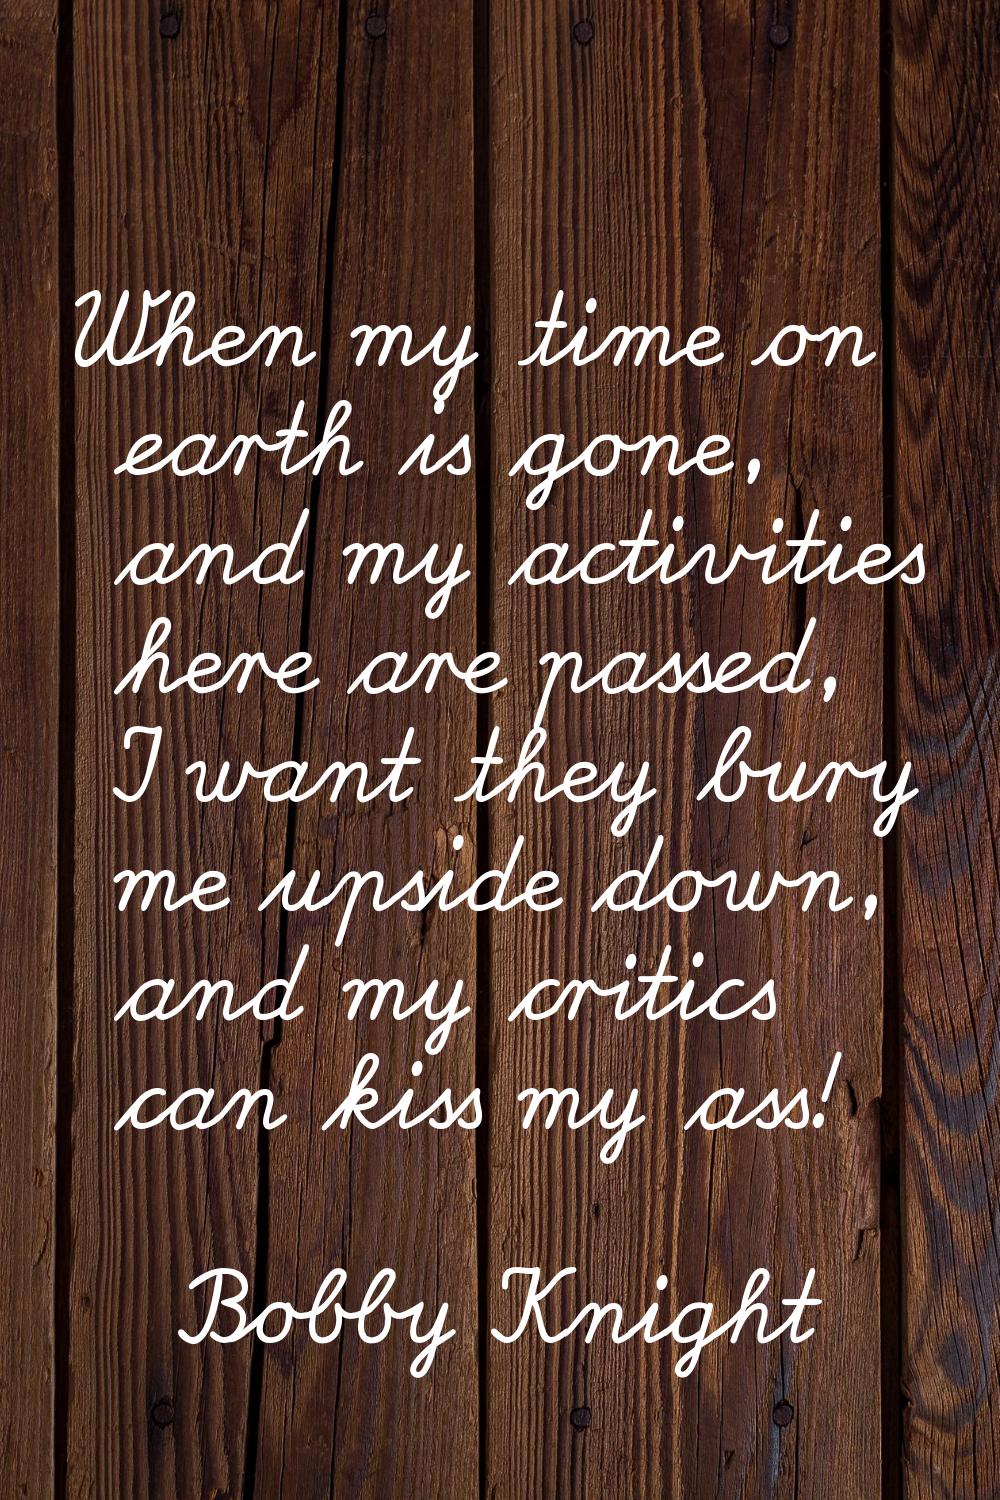 When my time on earth is gone, and my activities here are passed, I want they bury me upside down, 